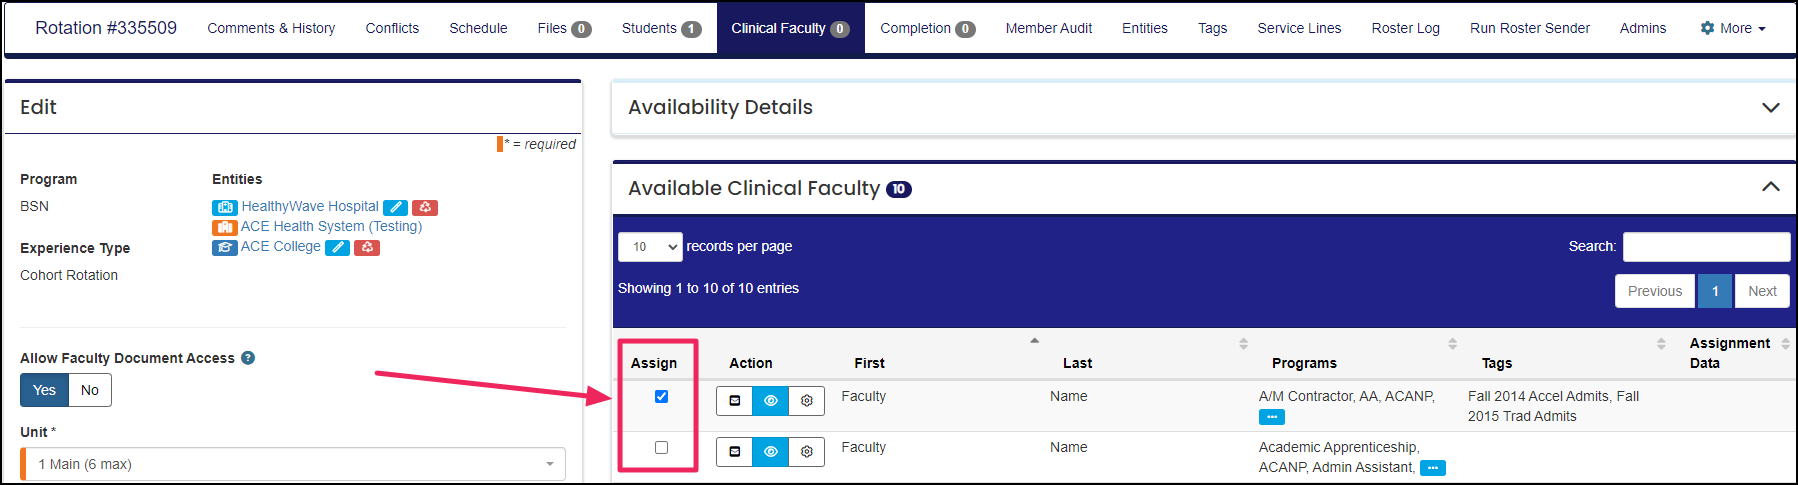 Image shows faculty tab of rotation edit page with an arrow pointing to checkboxes to assign faculty members.